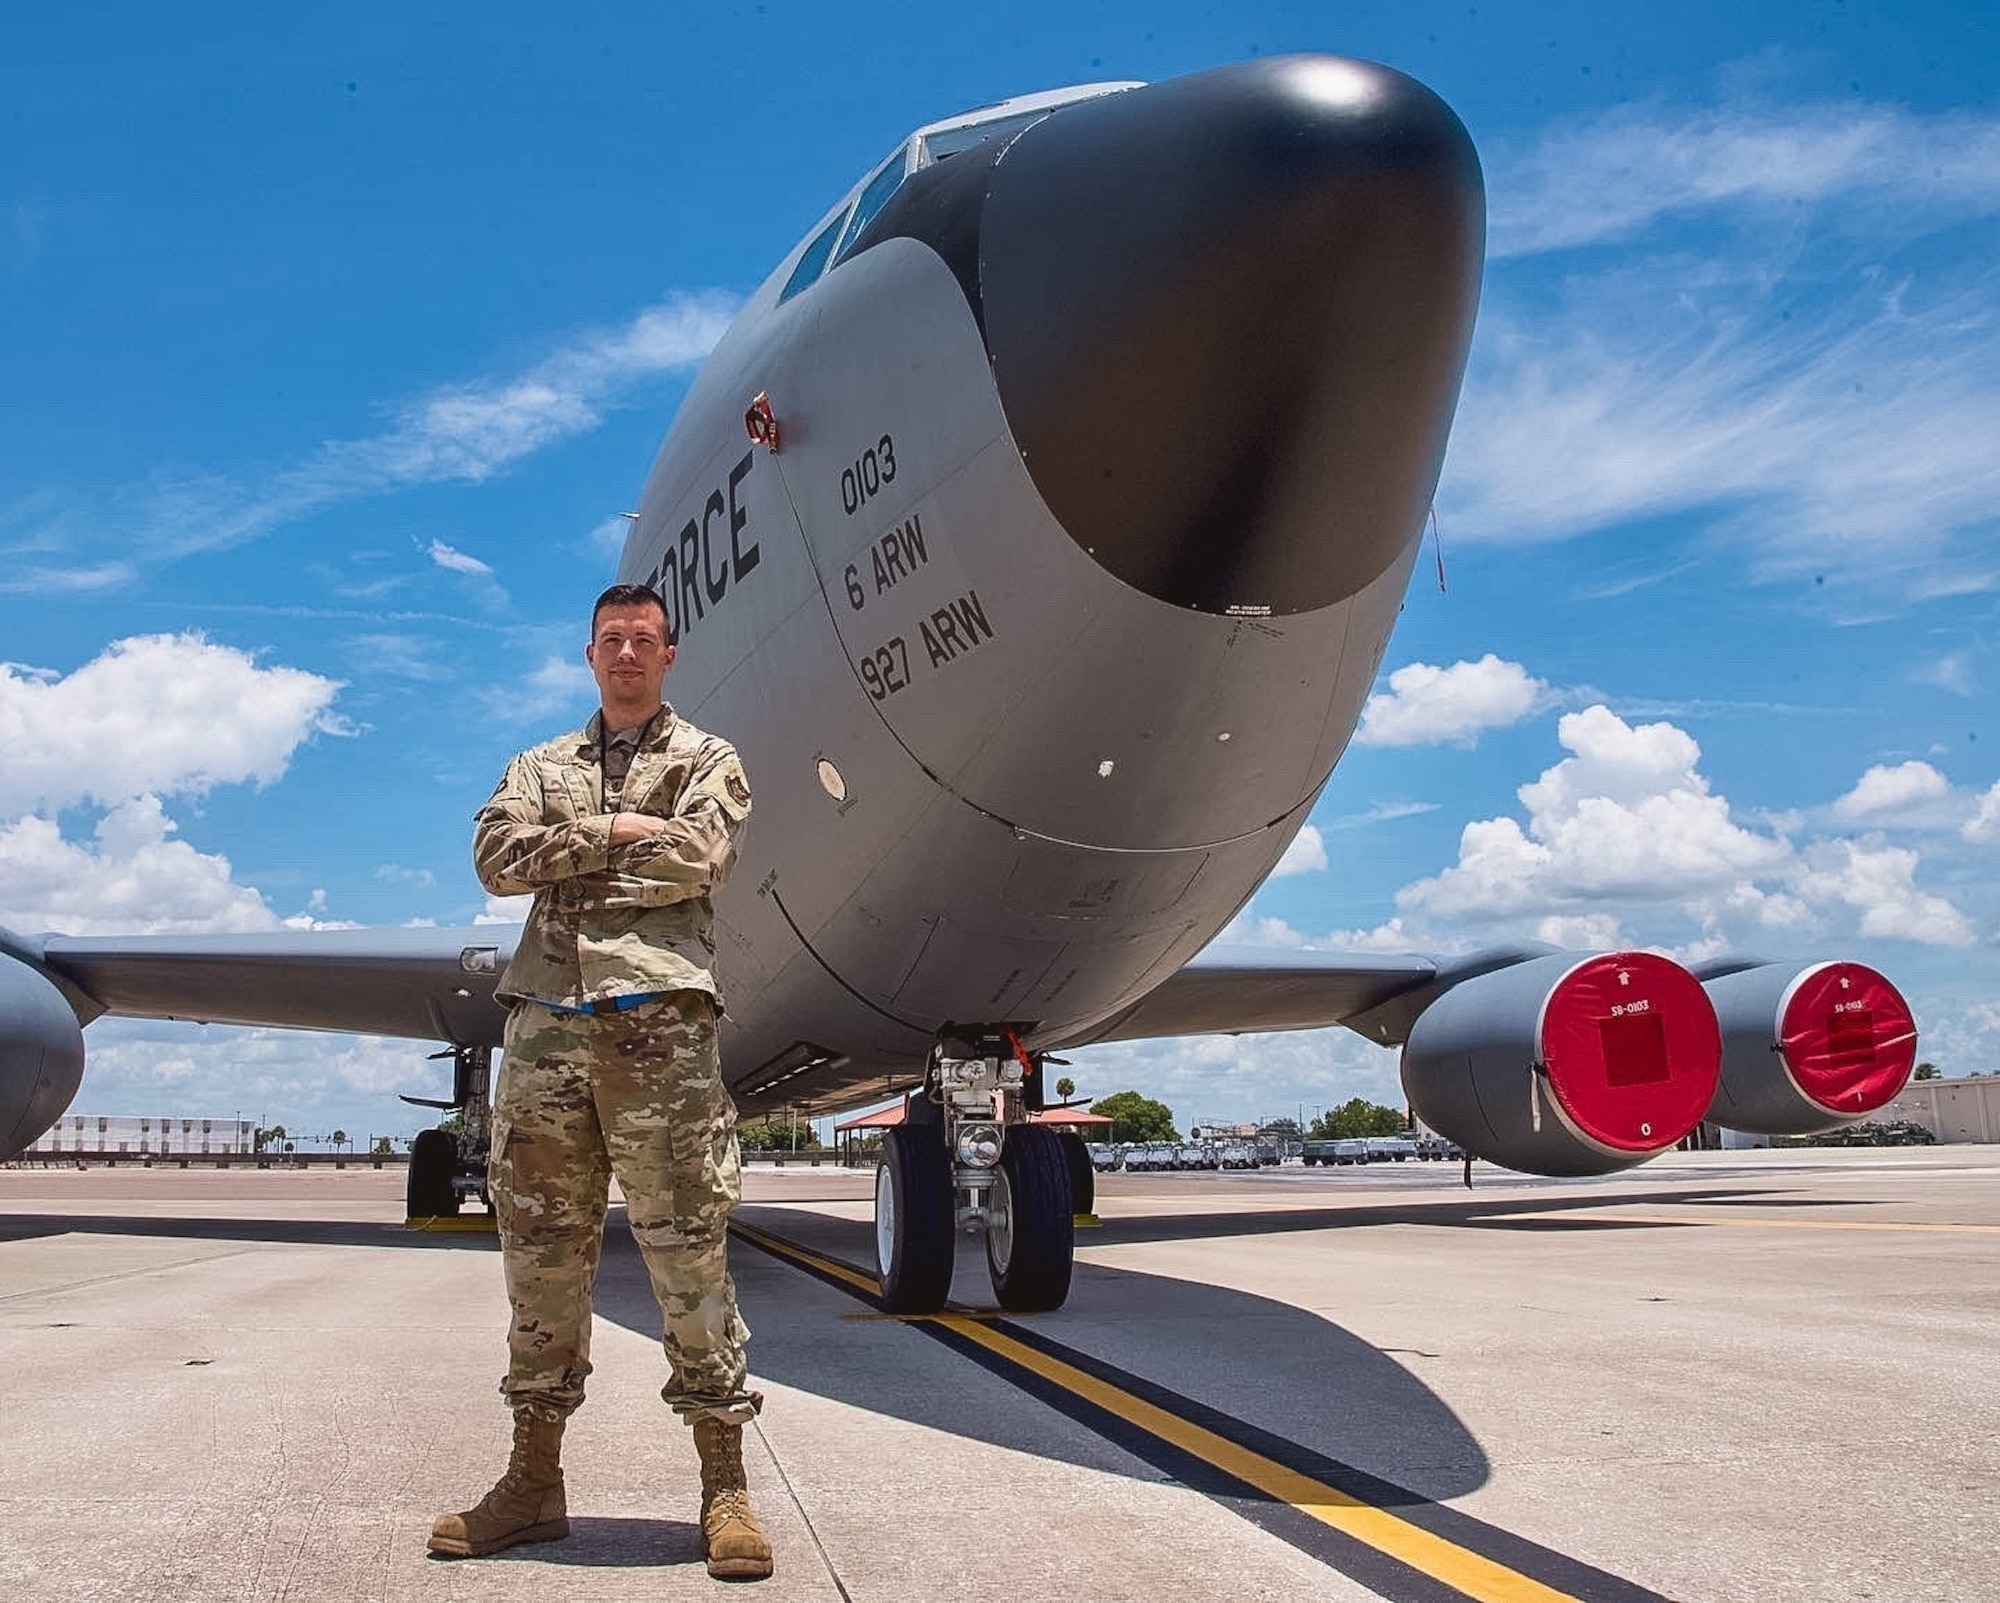 U.S. Air Force Tech. Sgt. Cody Plopper, a KC-135 Stratotanker aircraft crew chief with the 927th Air Refueling Wing, MacDill Air Force Base, Florida, stands in front of a KC-135 on the flight line July 10, 2021. Plopper was recently named as Air Force Reserve Command's Crew Chief of the Year. (U.S. Air Force photo by Staff Sgt. Tiffany A. Emery)